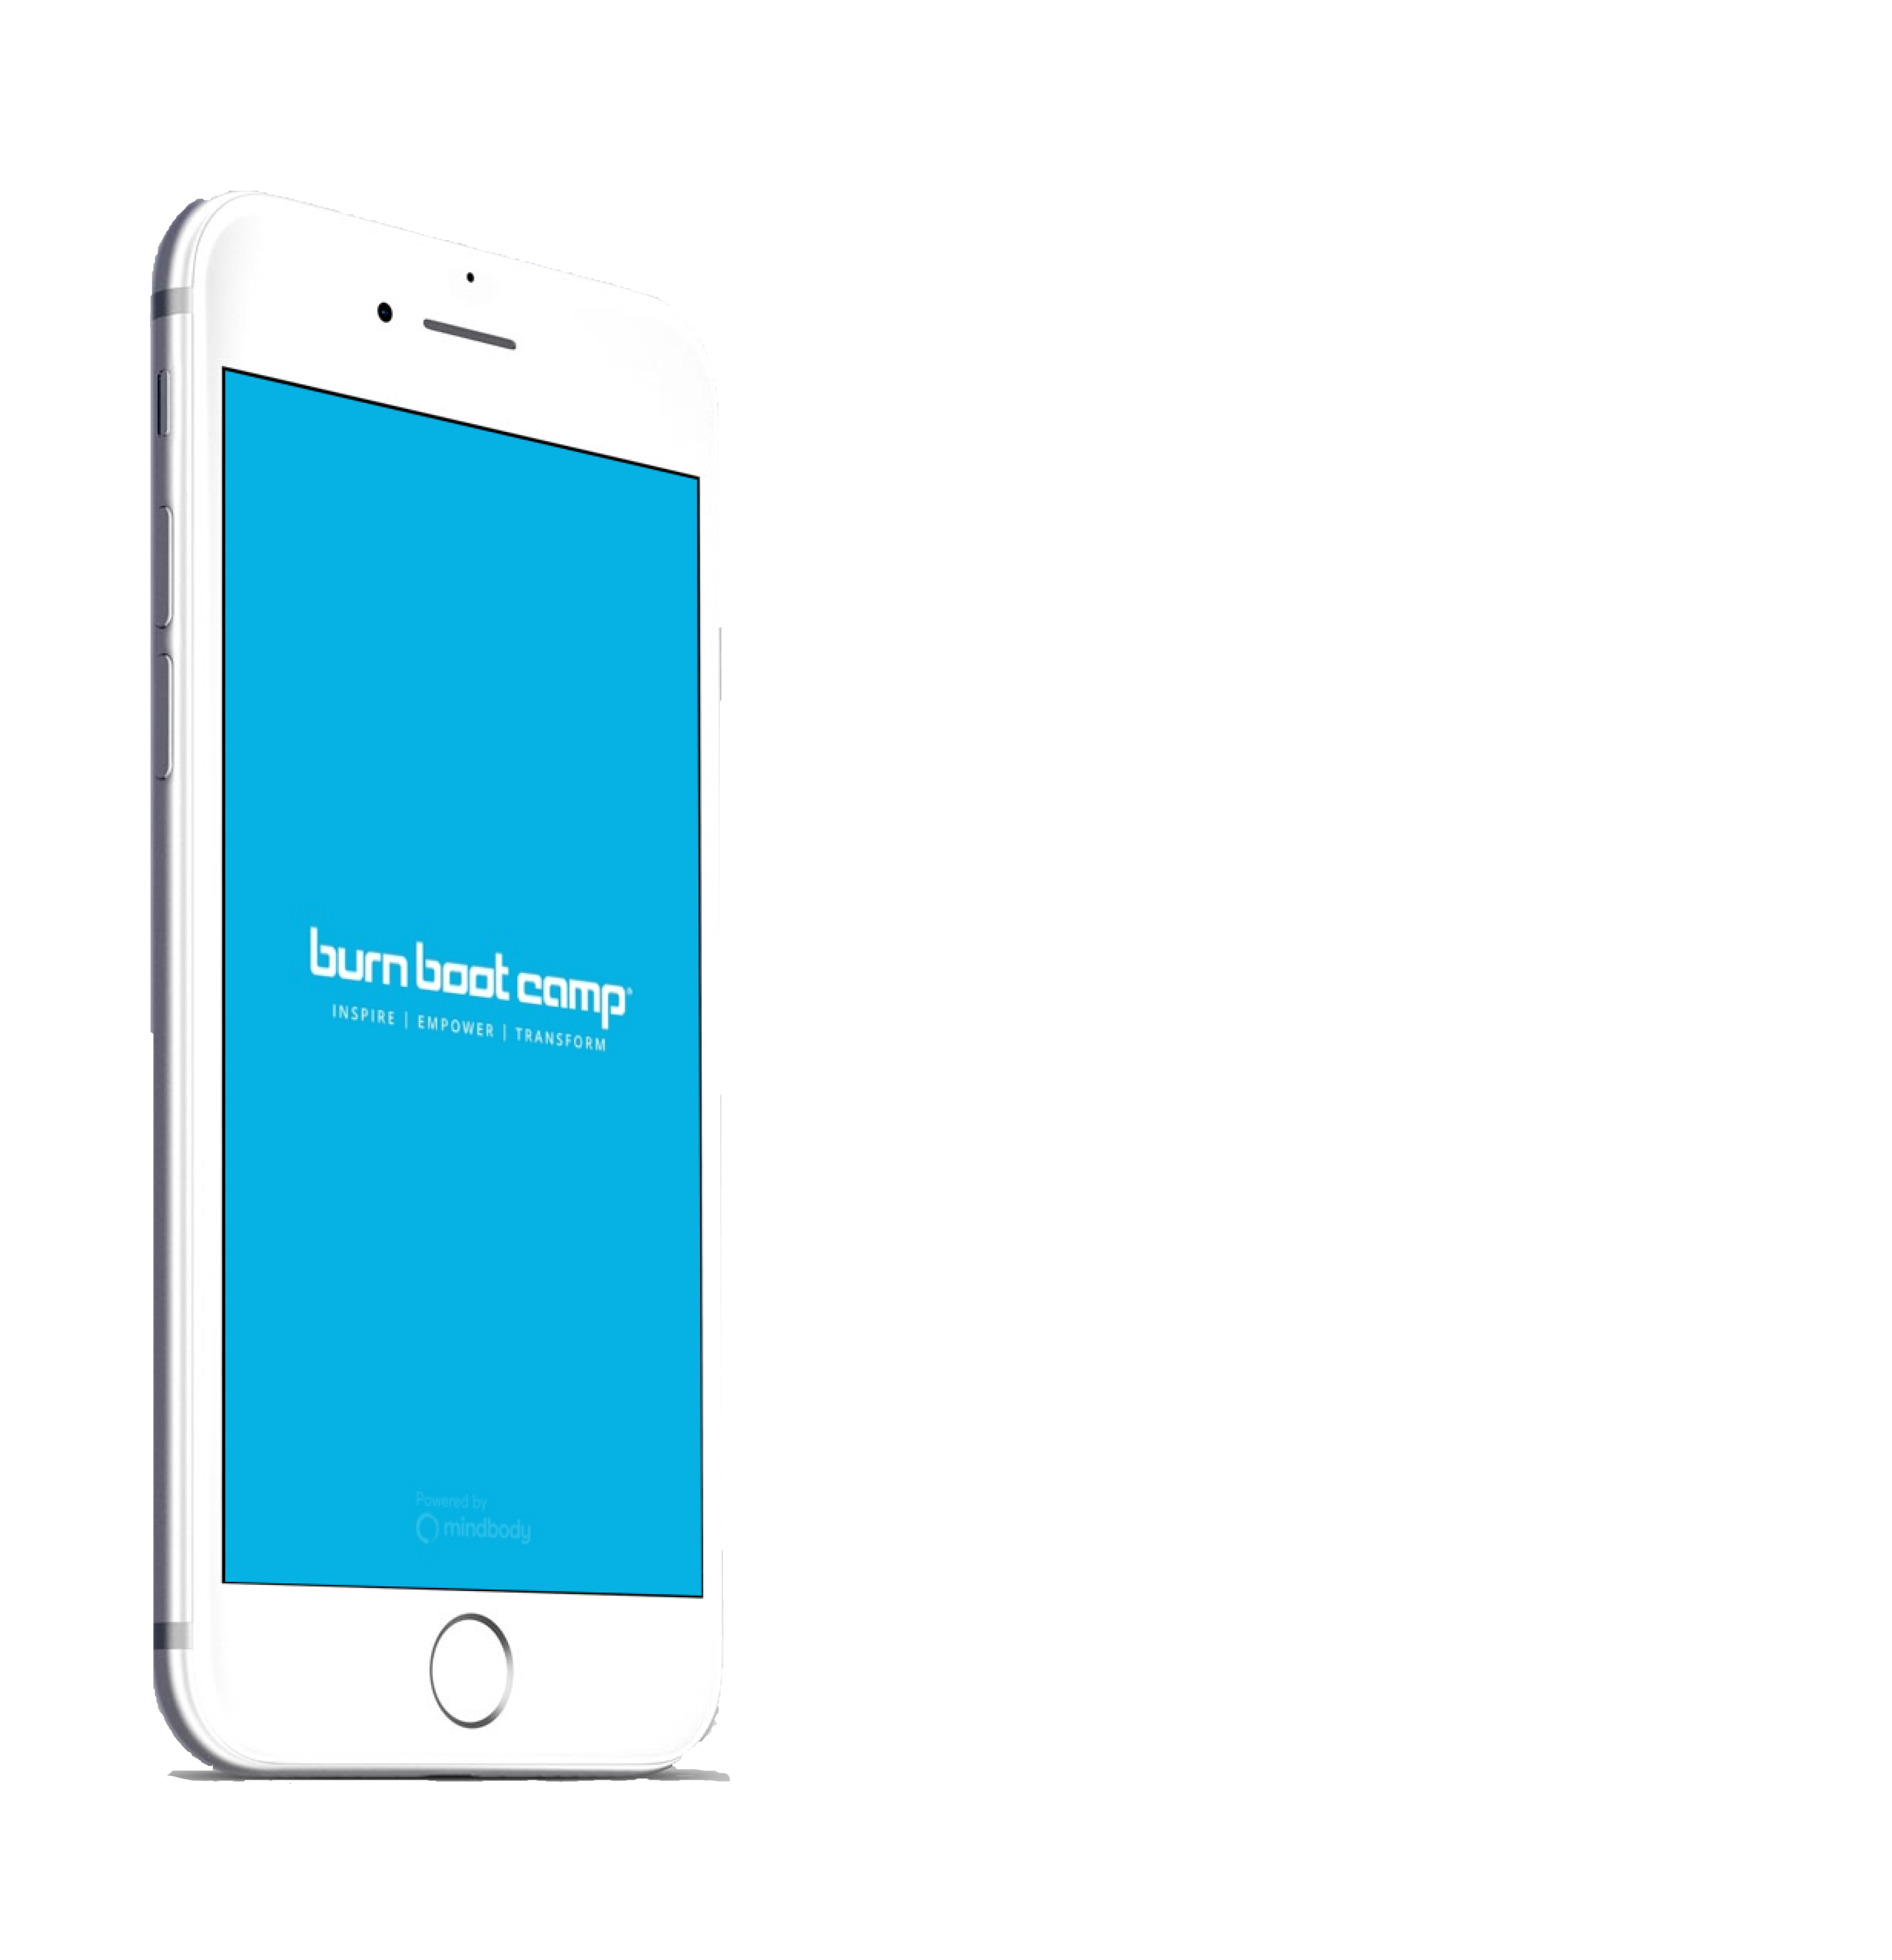 iPhone with light blue screen and white Burn Boot Camp logo